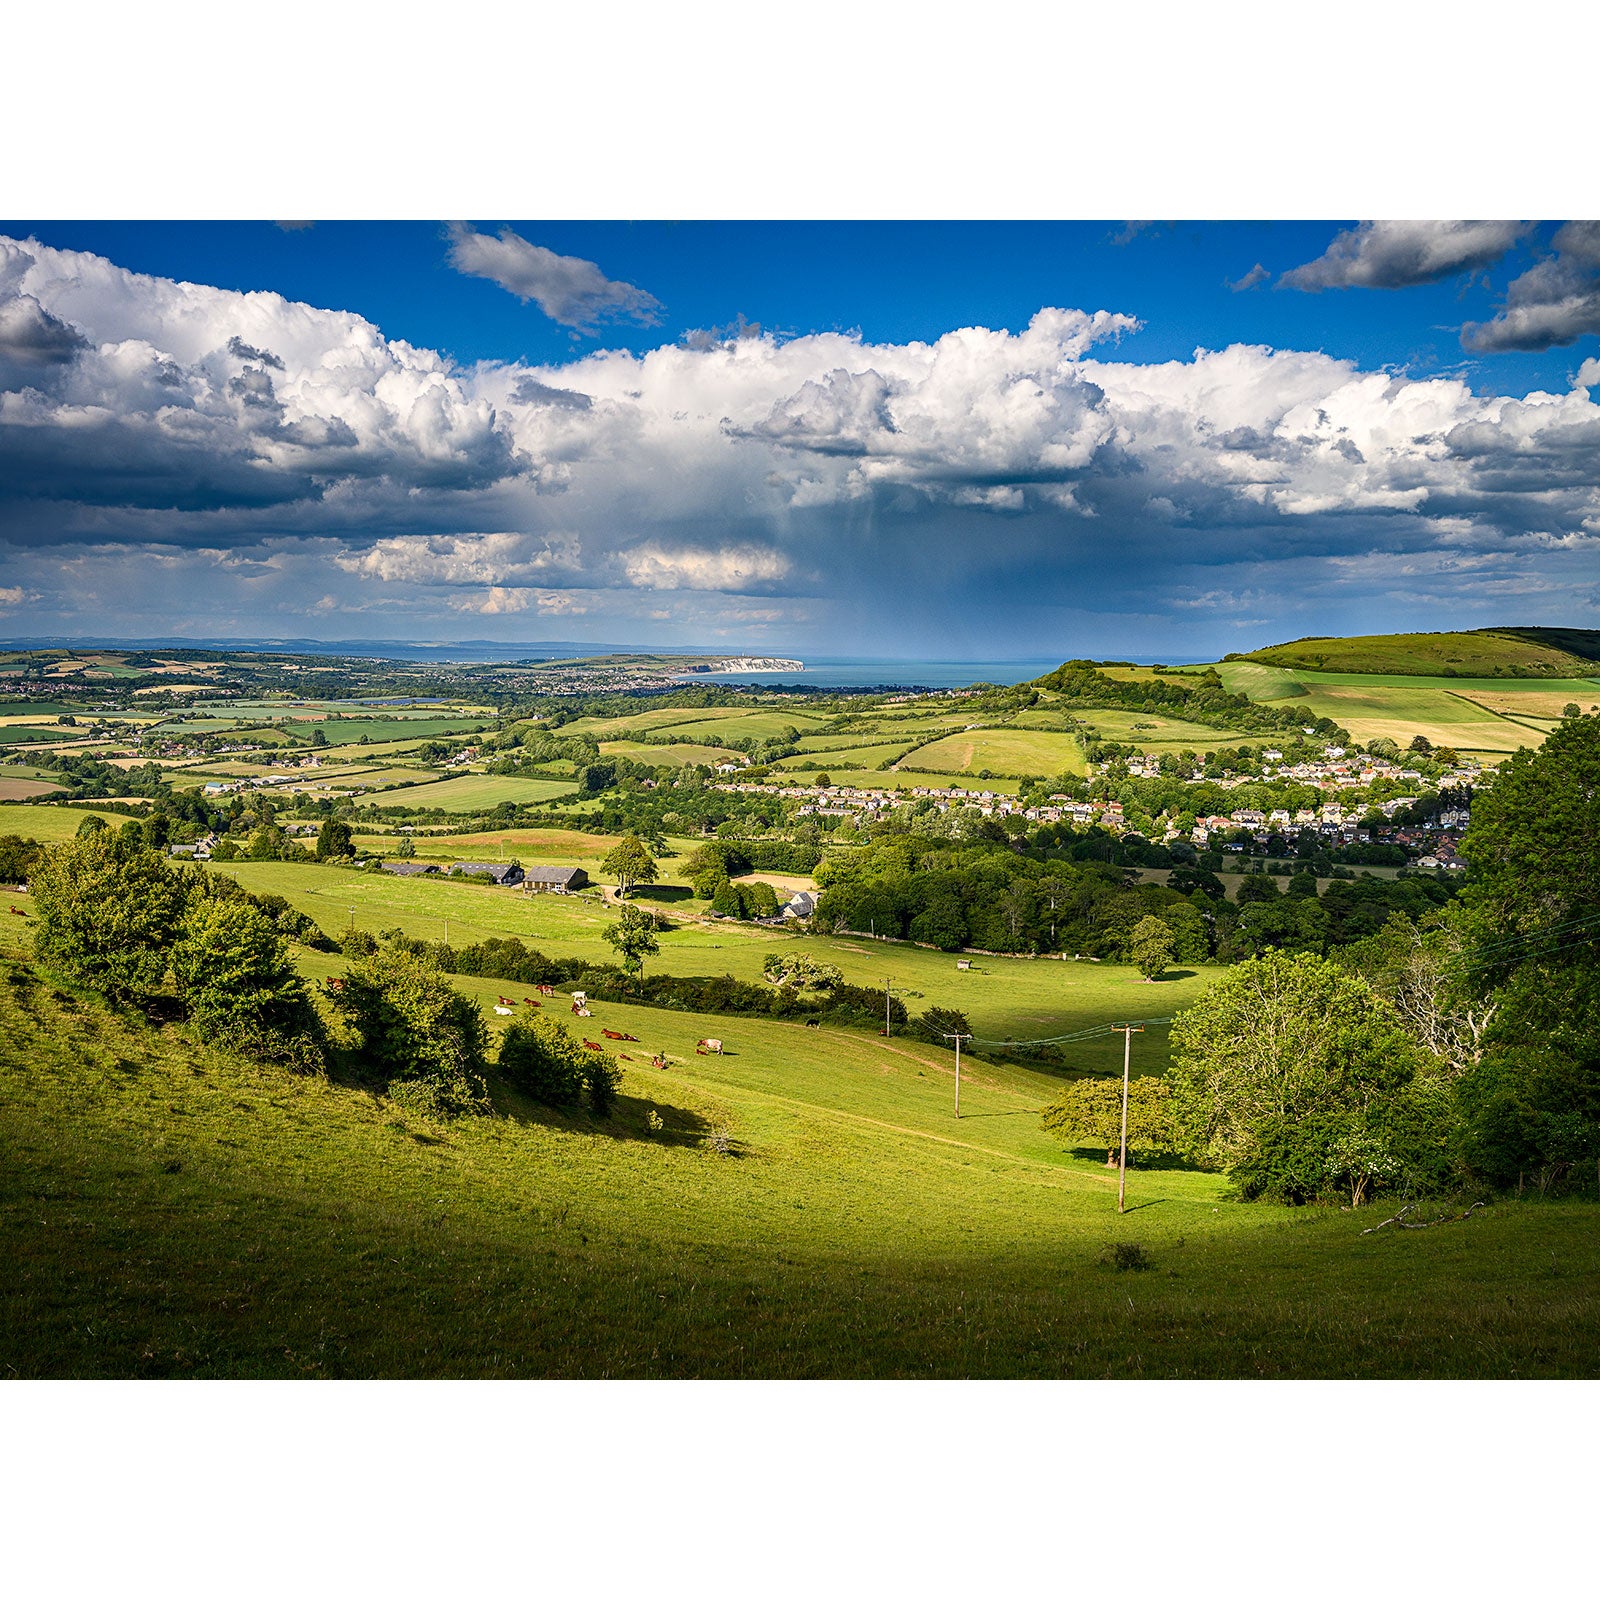 Overlooking Wroxall - Available Light Photography